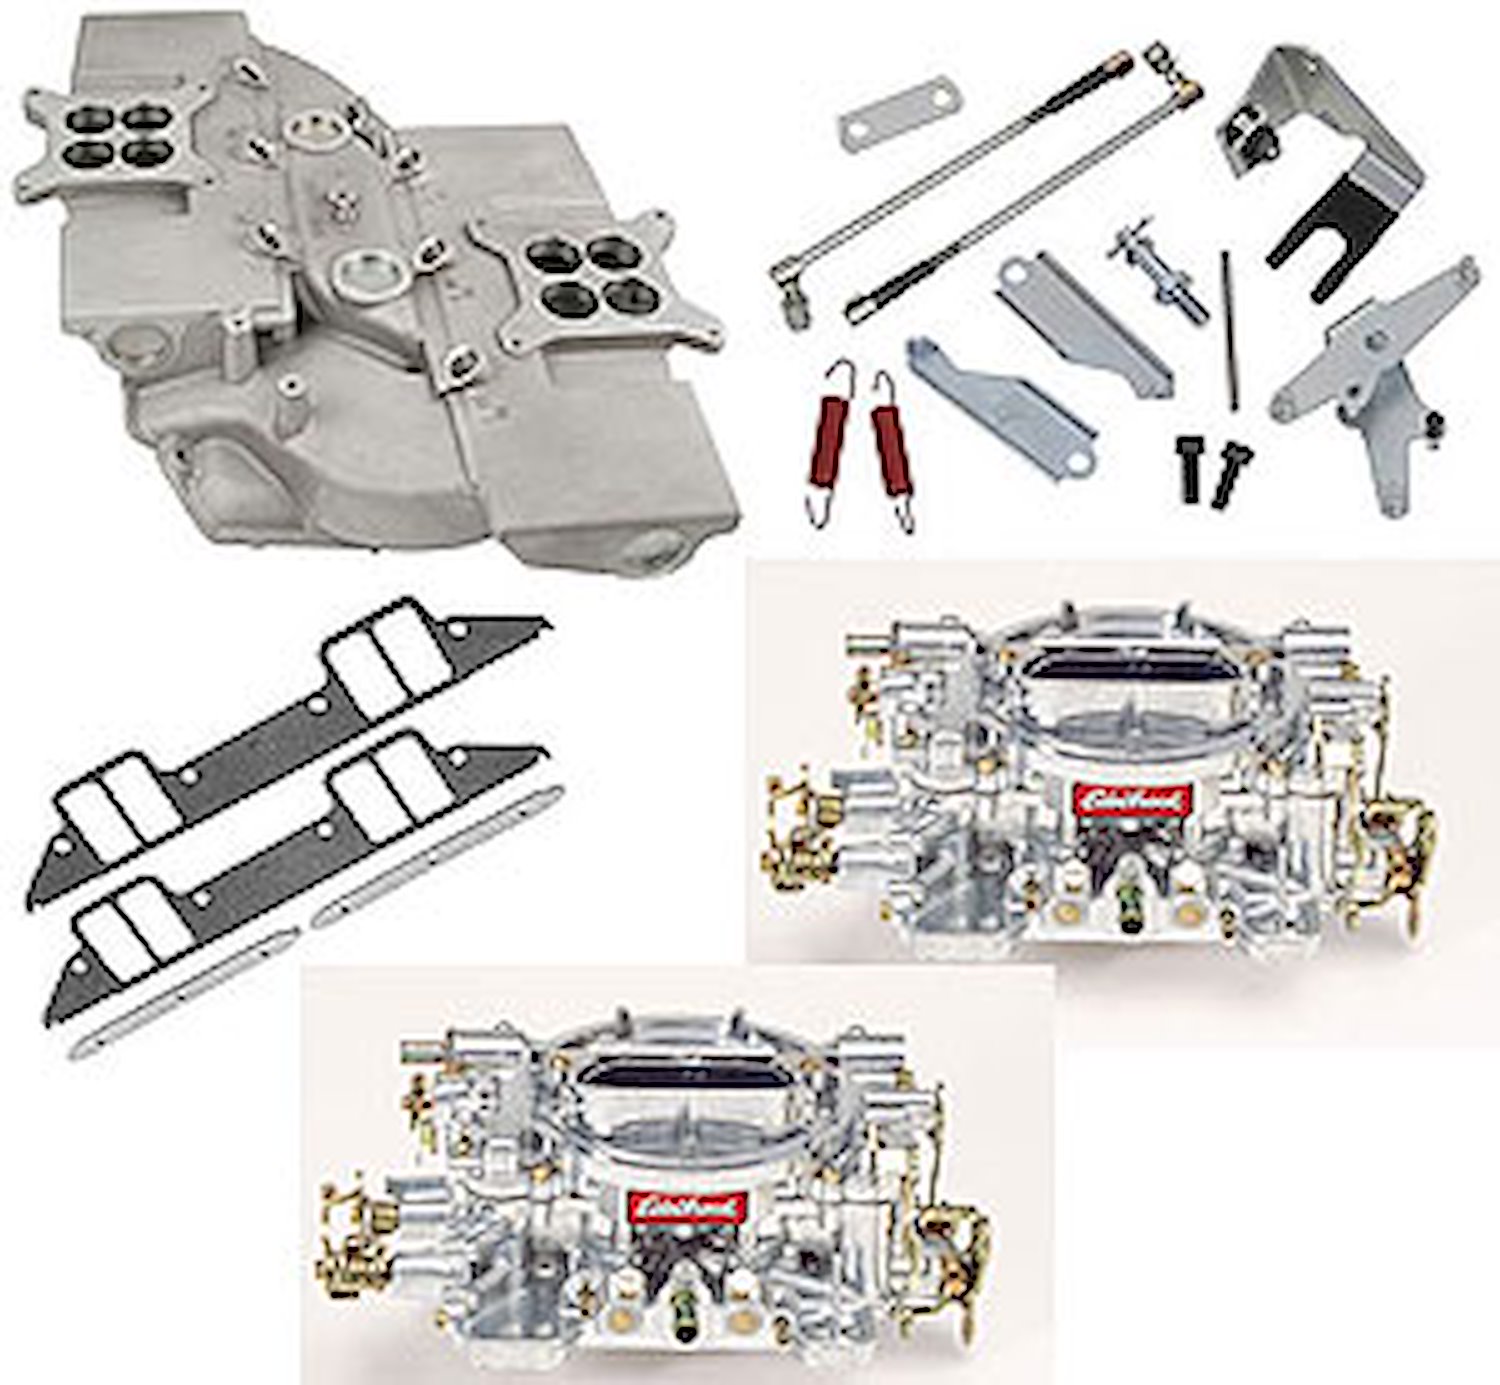 Max Wedge Cross Ram Intake Manifold Kit "RB" Engines with Max Wedge Cylinder Heads